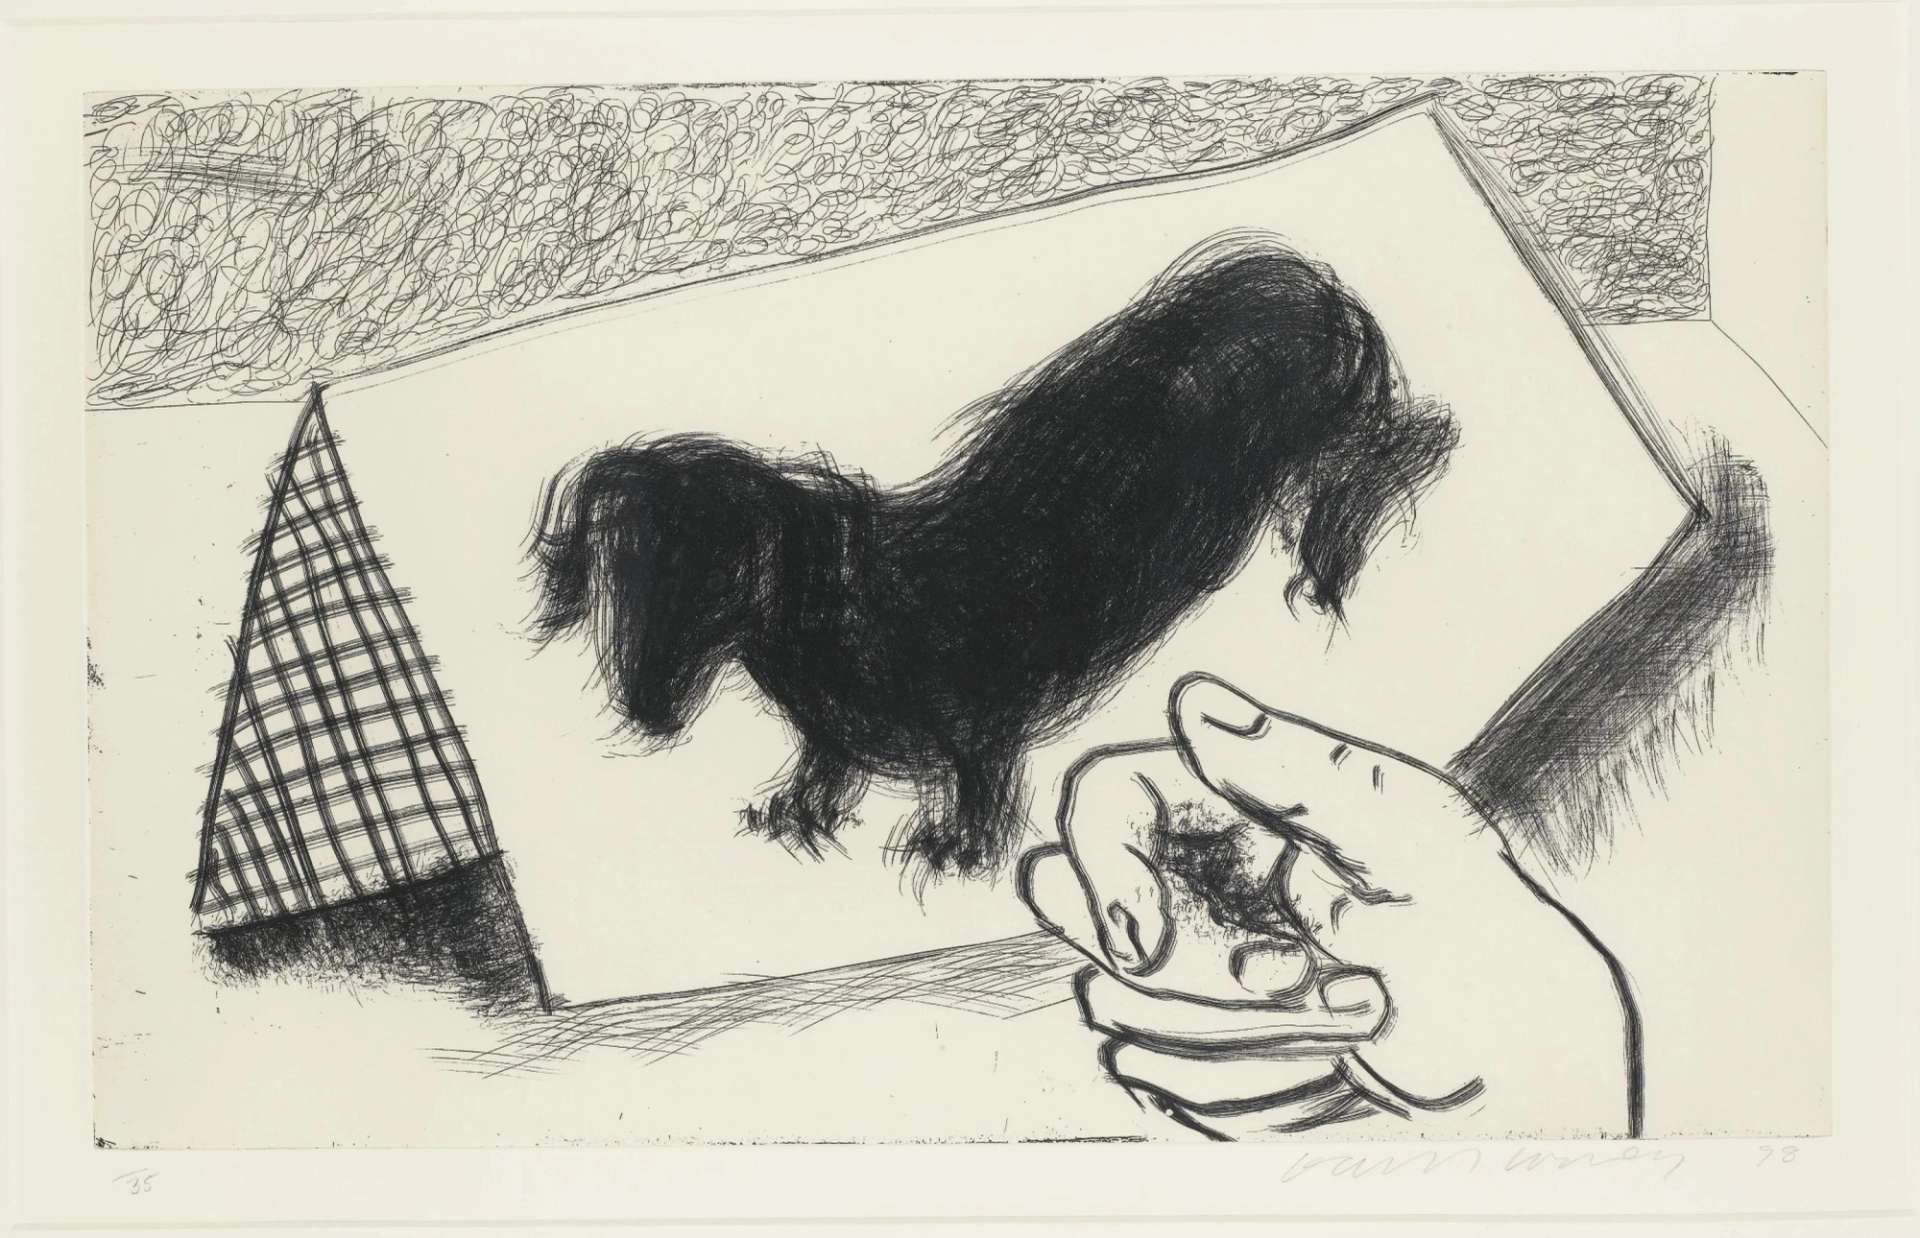 This print is a monochrome portrait of one of Hockney’s dachshunds. However, while most of the series focuses just on the dogs, here we find the composition interrupted by the inclusion of the artist’s own hand, curled up in the foreground as if reaching out from behind the sheet of paper or etching plate he is working on.